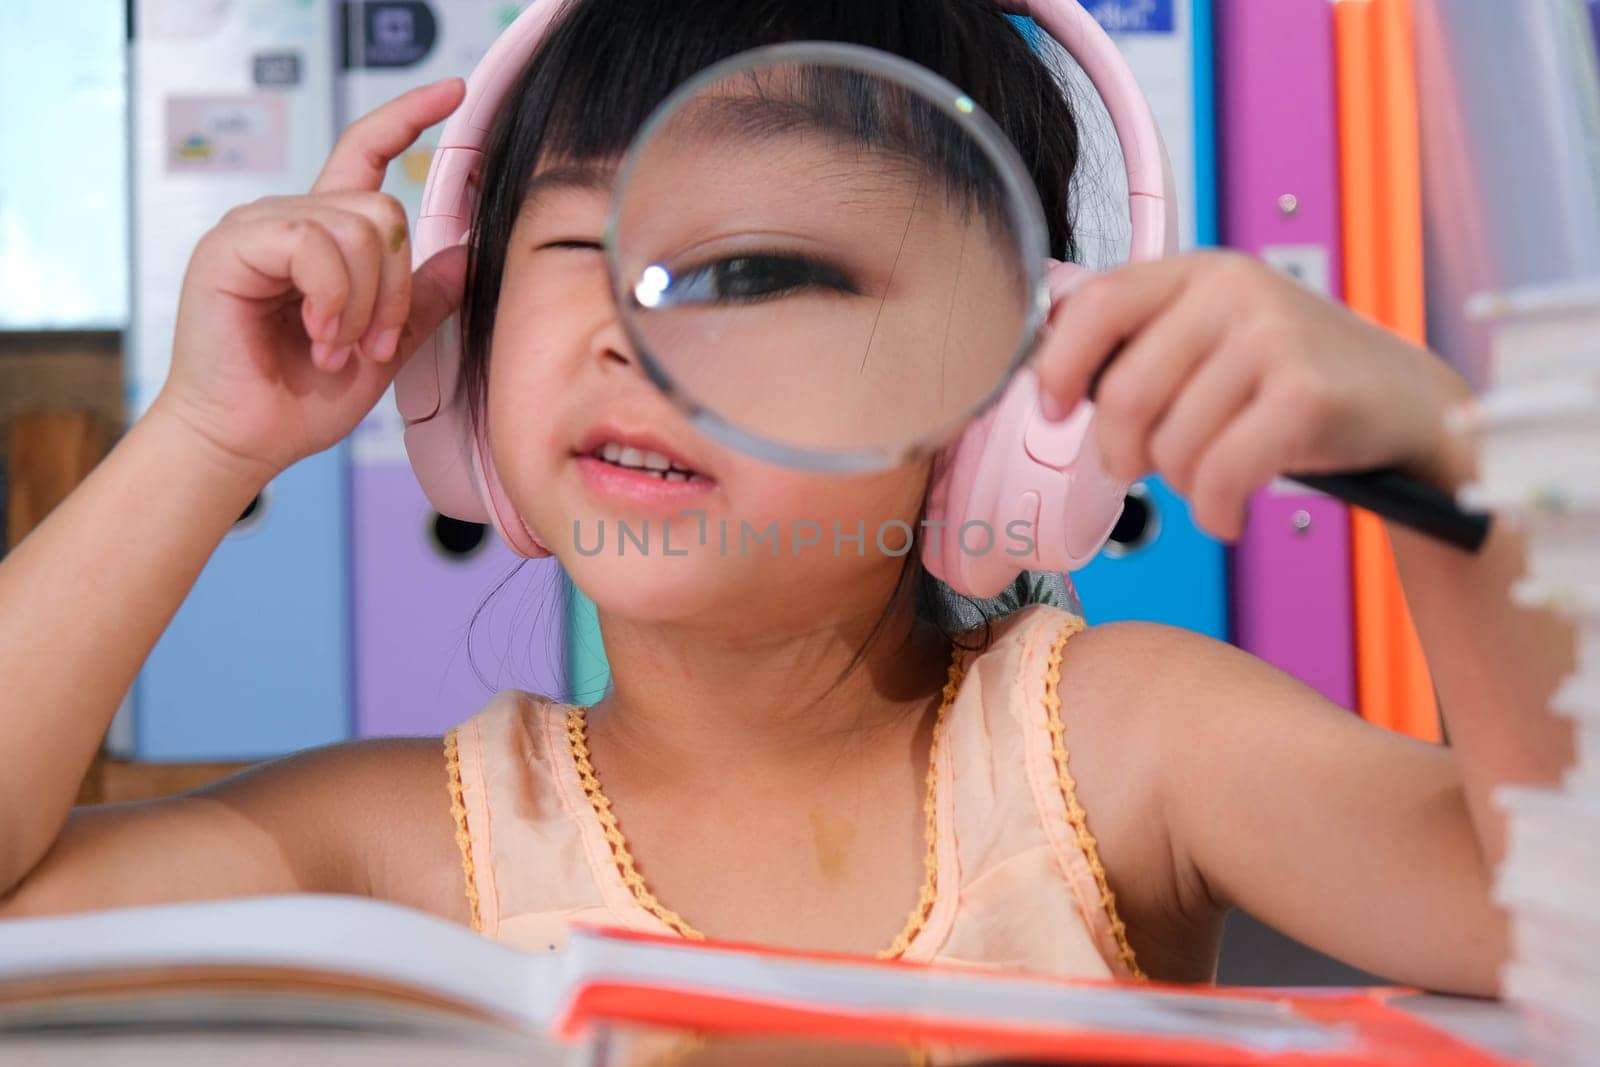 Cheerful little girl in headphones reading a book with a magnifying glass sitting at the table in her room at home. by TEERASAK